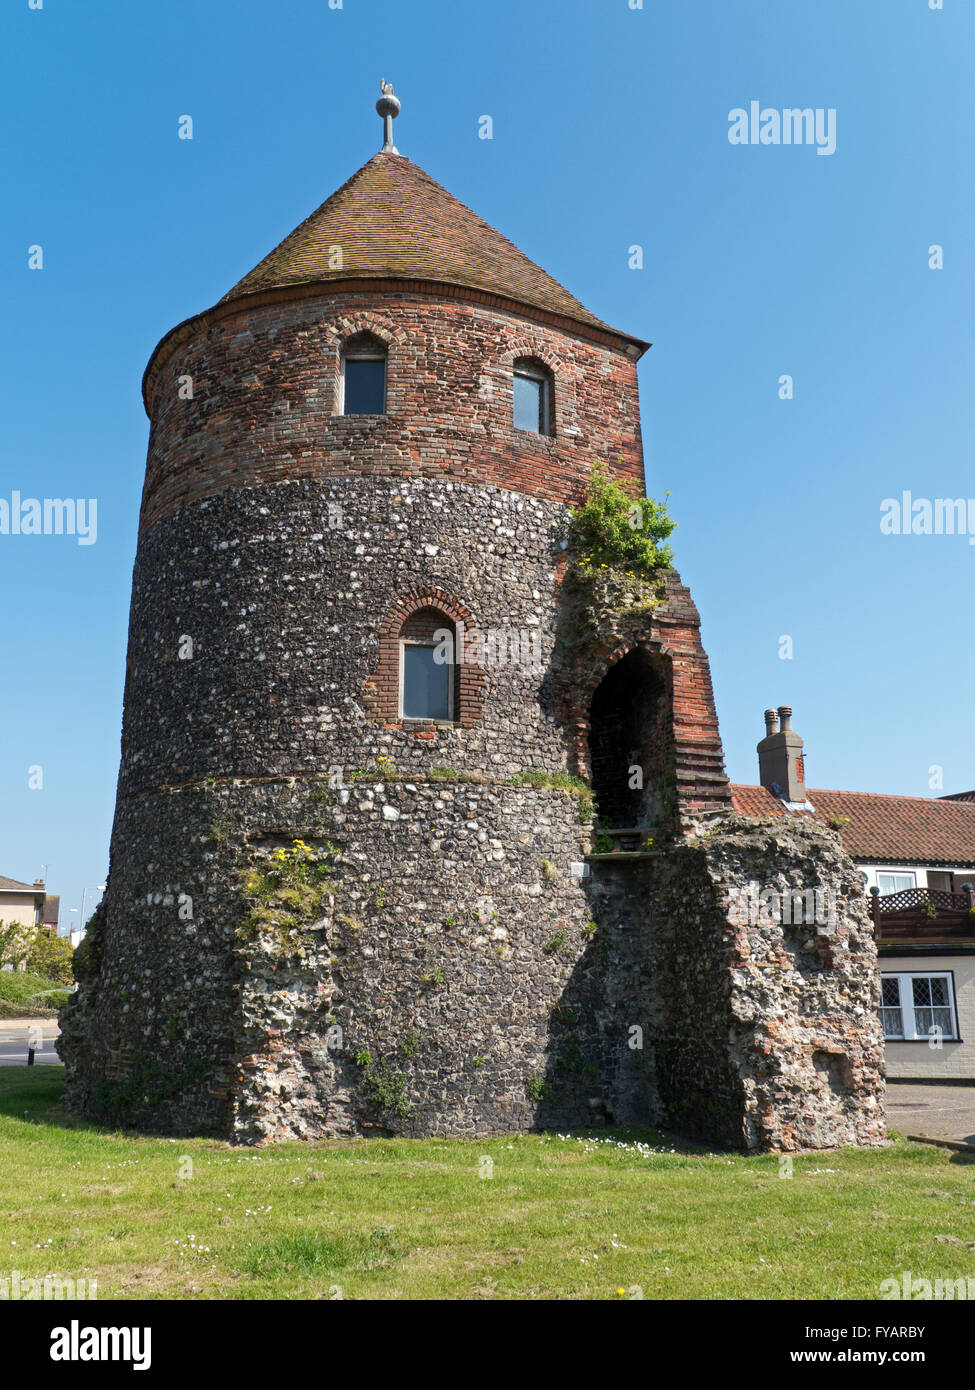 The North West Tower on the edge of The Old Town Wall, Great Yarmouth, Norfolk, England Stock Photo